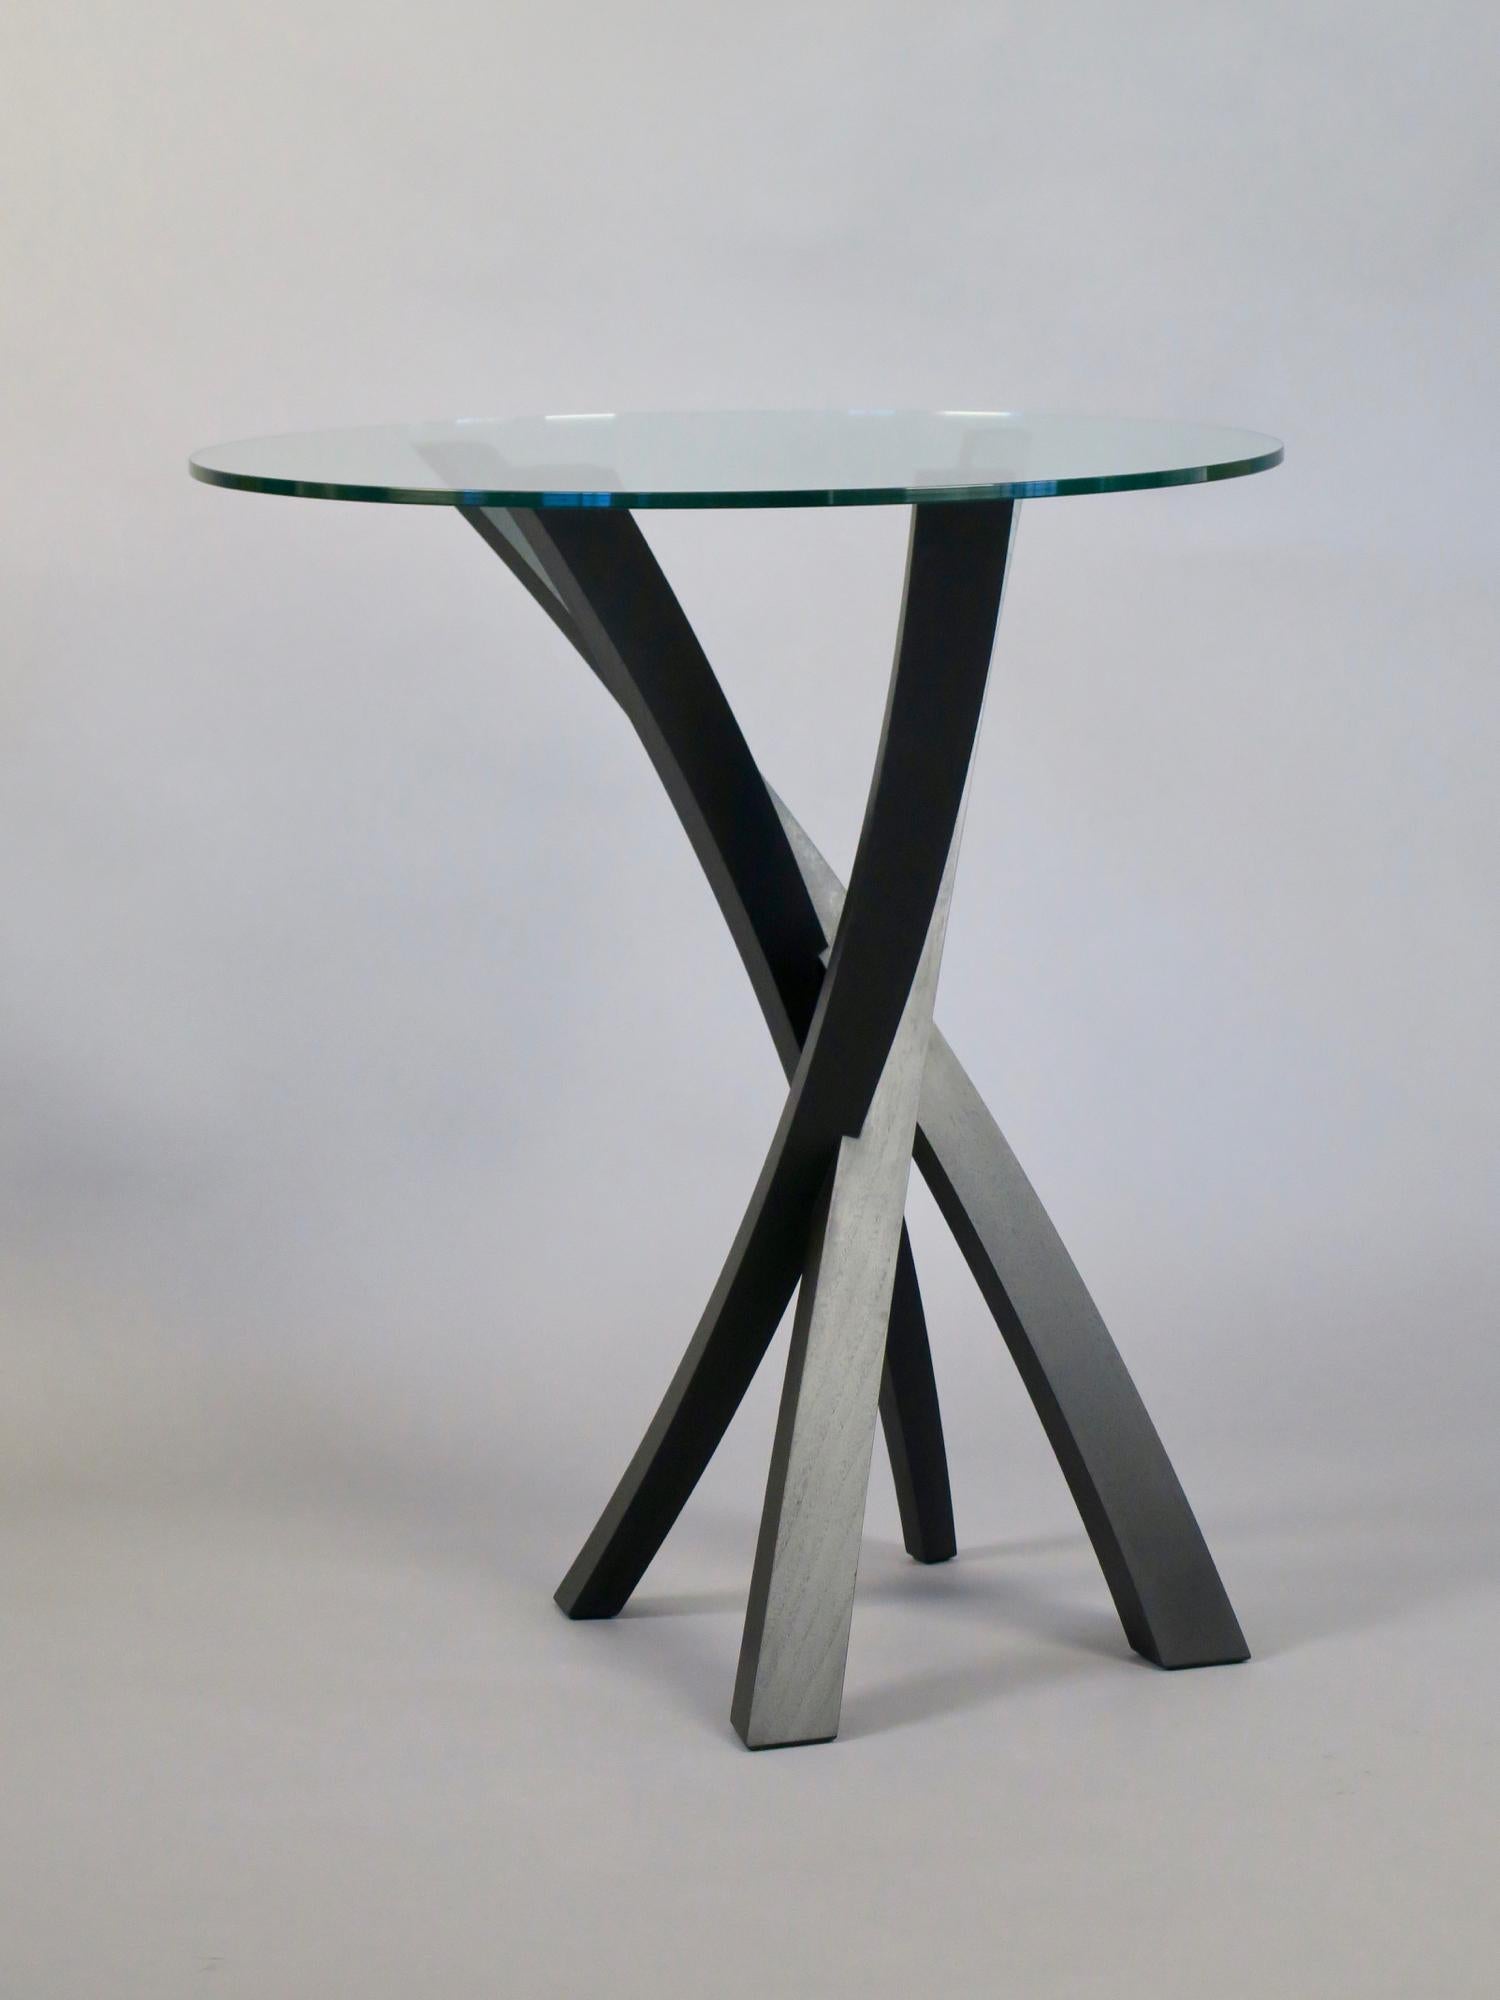 Sculptural Walnut and Glass Side Table by Thomas Throop/ Black Creek Designs For Sale 2